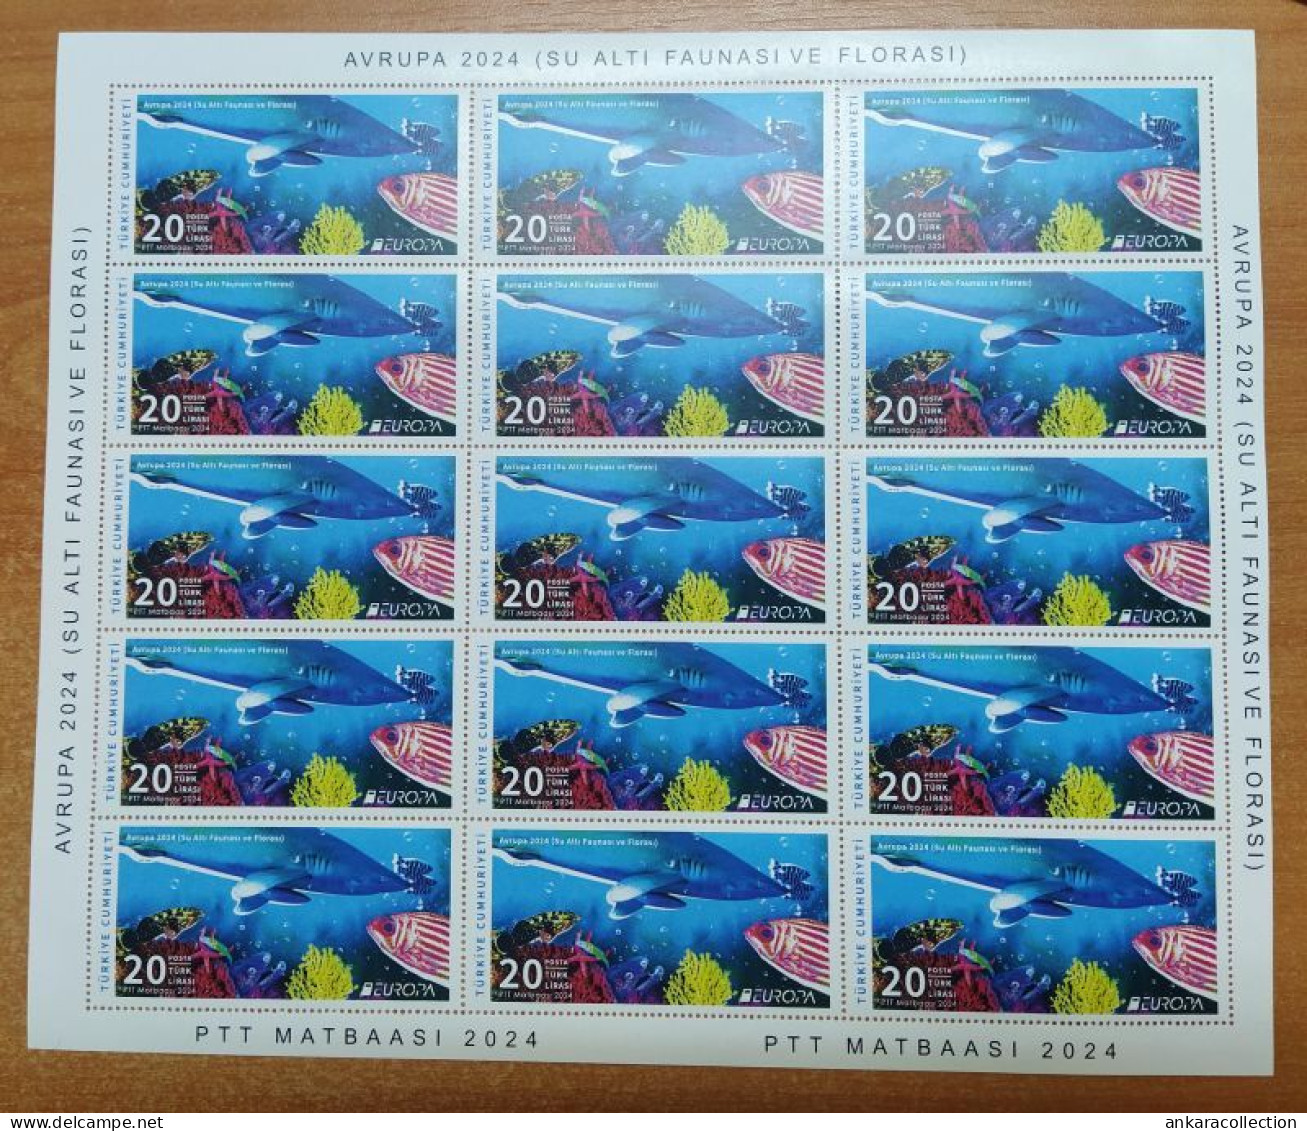 AC - TURKEY STAMP -  EUROPA 2024  UNDERWATER FAUNA AND FLORA  MNH FULL SHEET ANKARA, 09 MAY 2024 - Unused Stamps